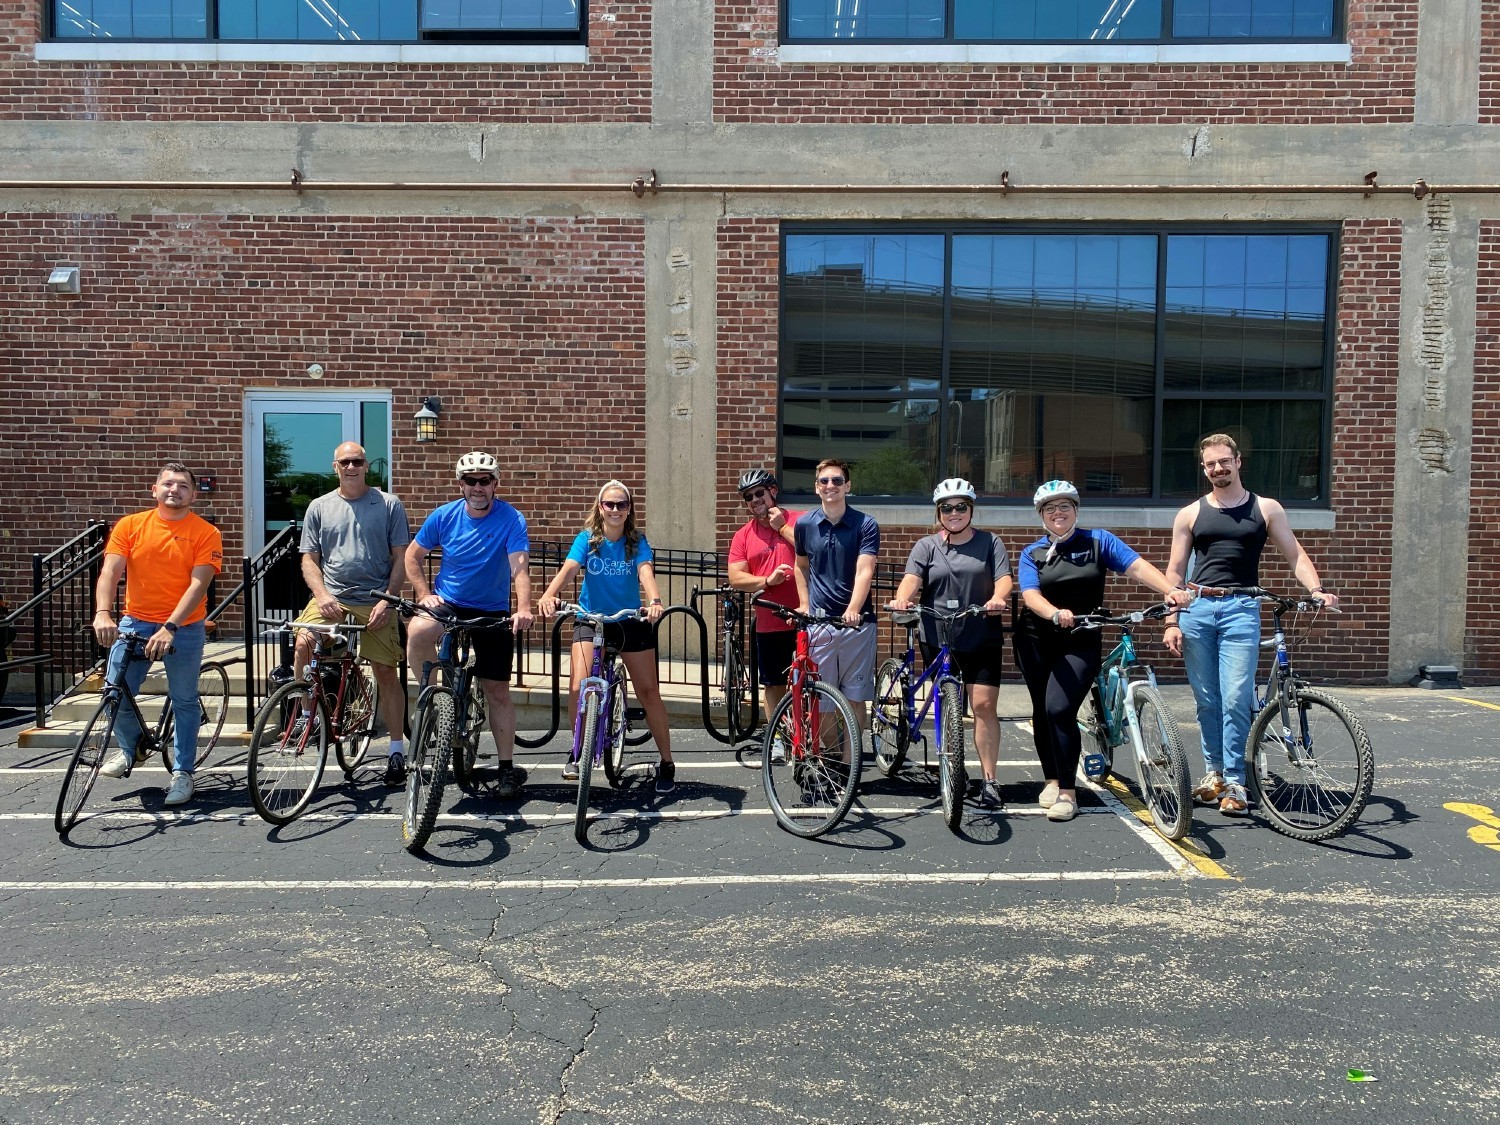 COLLEAGUES TOOK A REFRESHING BREAK AND WENT ON AN EXCITING LUNCHTIME BIKE RIDE.